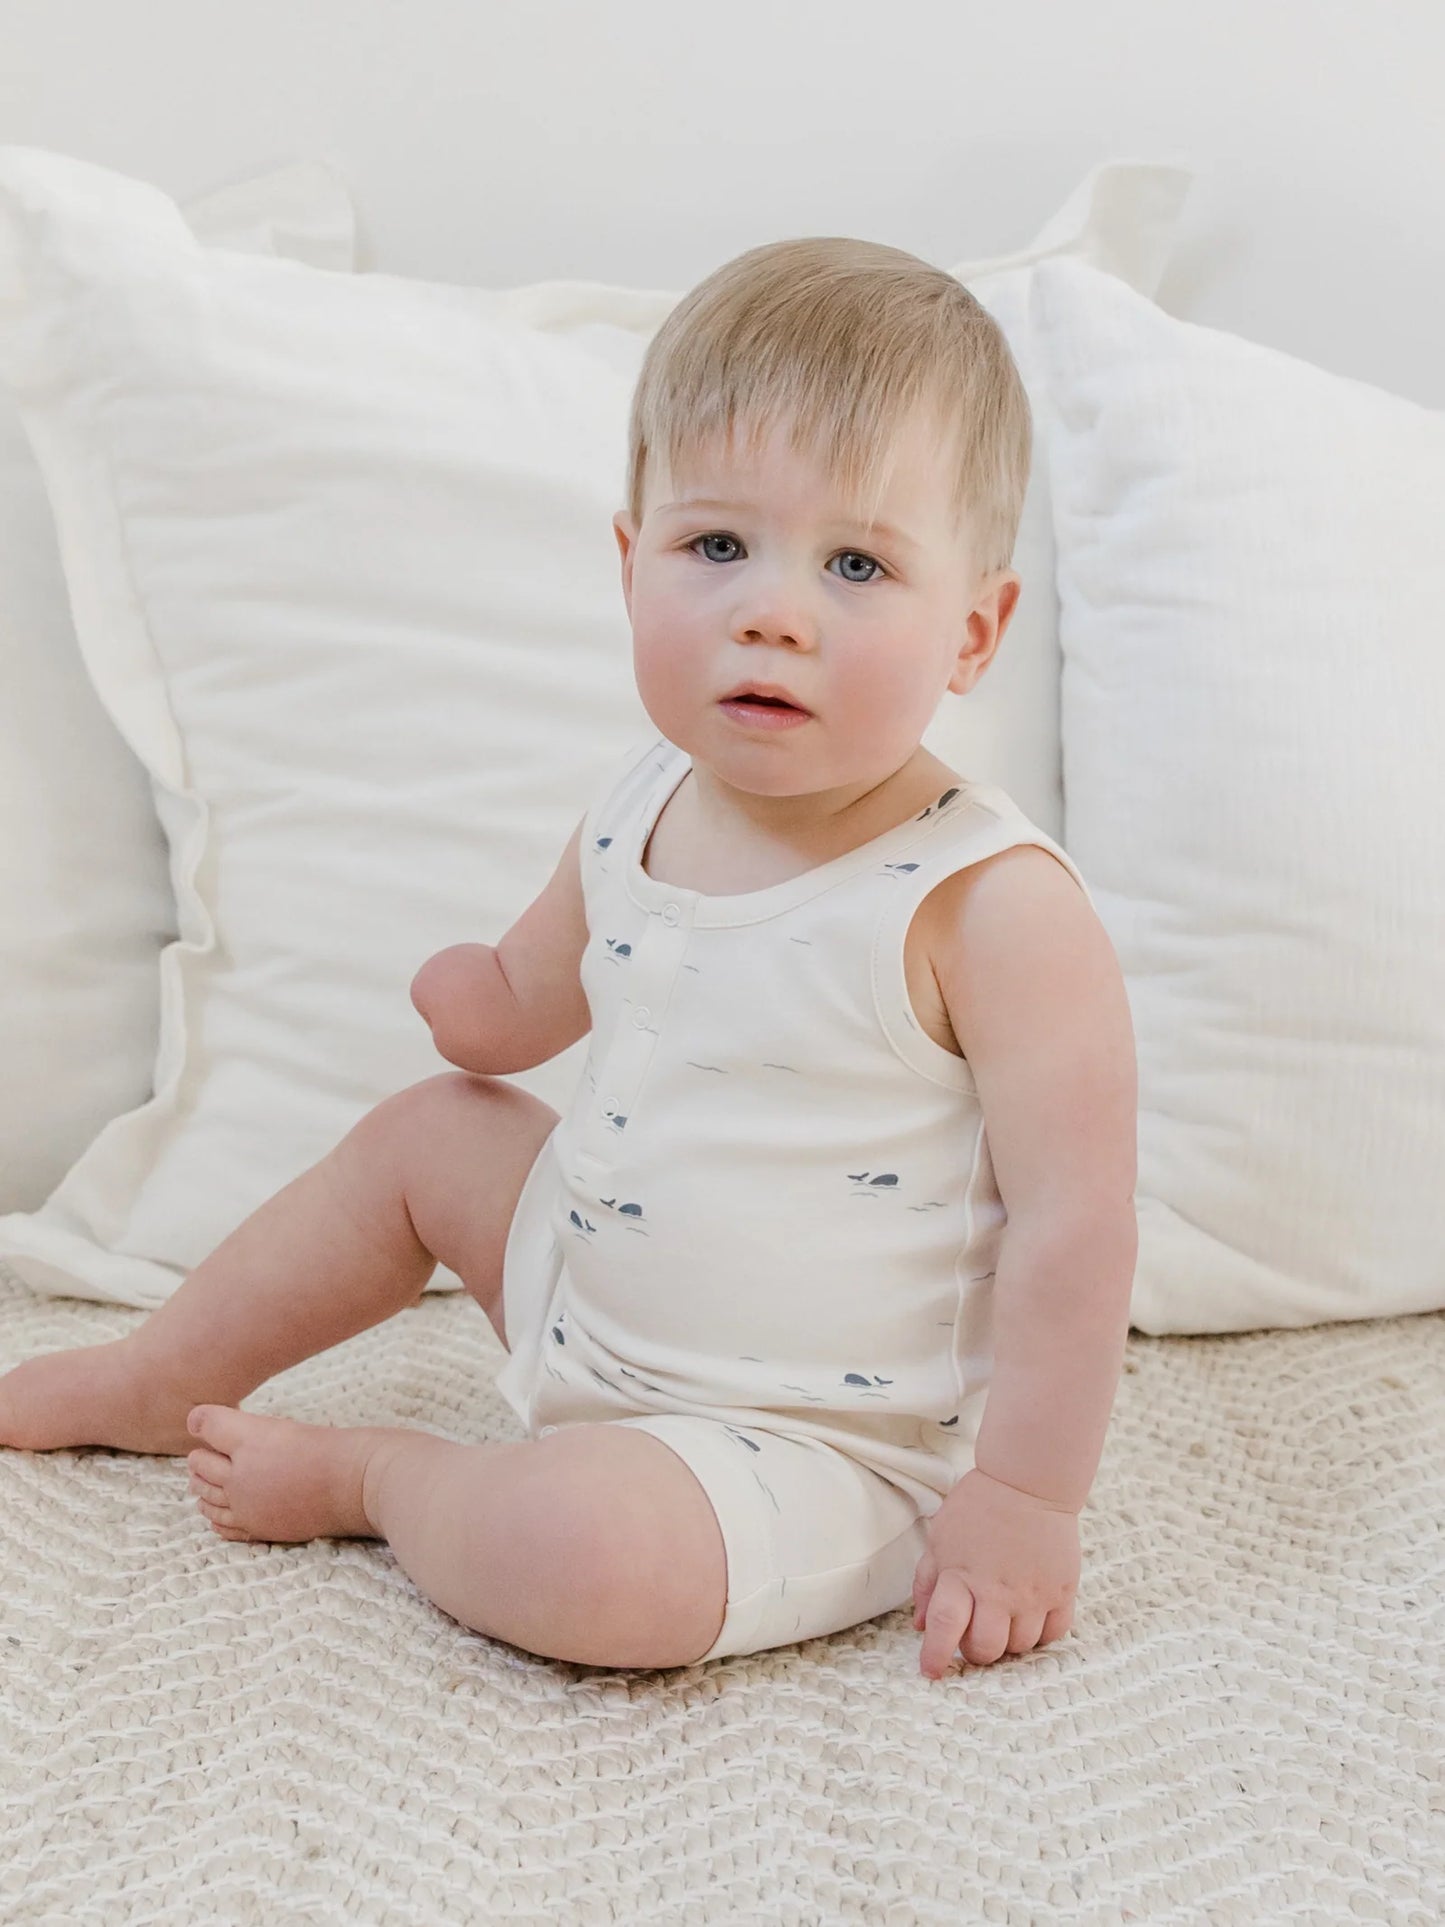 The Nile Romper is an effortless one-piece that will make mornings easier. With snap buttons and 100% organic cotton, your babe will live in this romper all summer.
